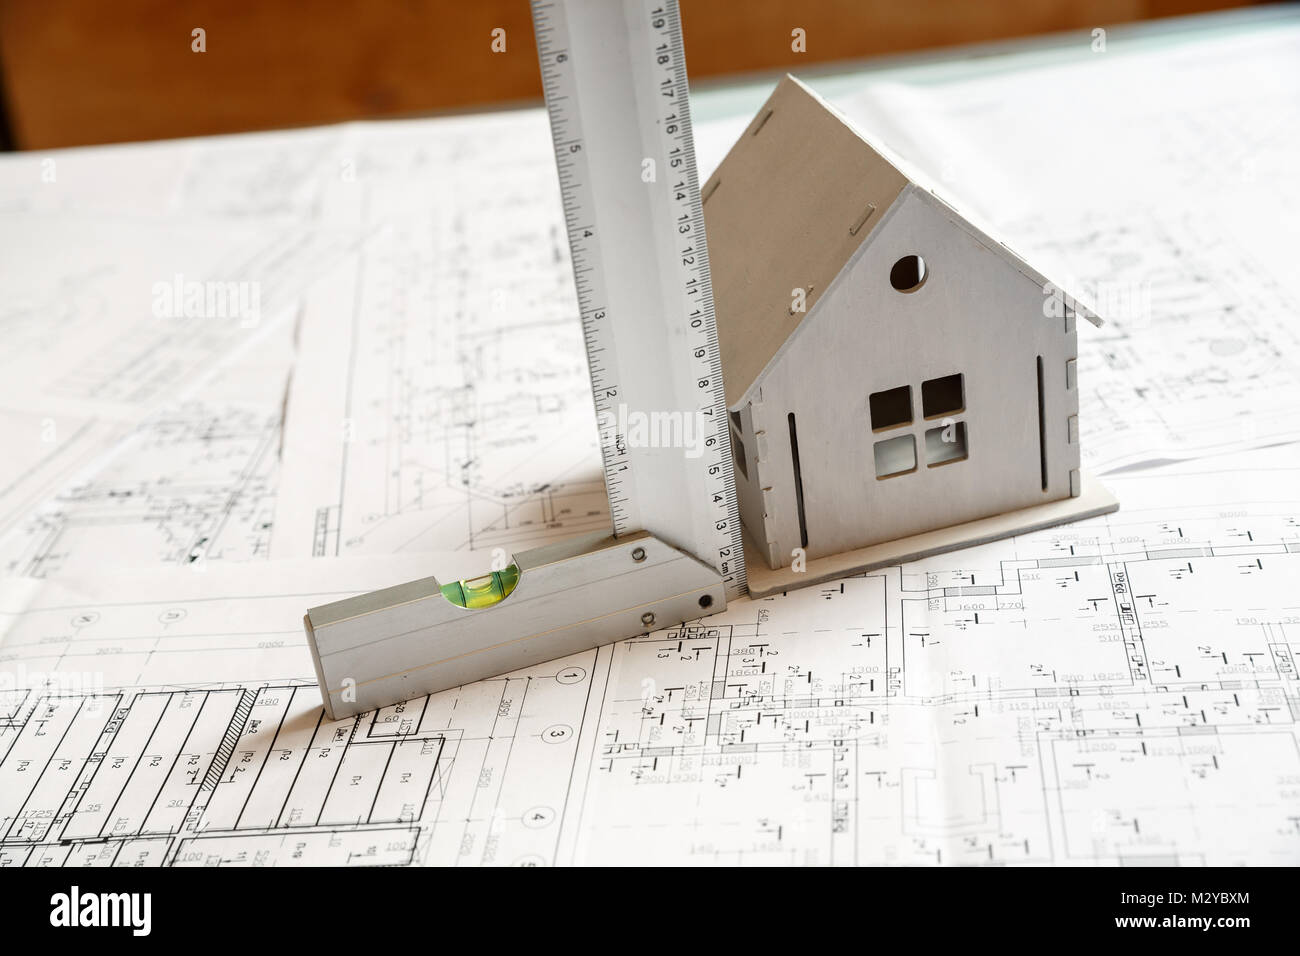 Image of small white toy model house on architecture blueprint plan with a ruler. Architect working concept Stock Photo